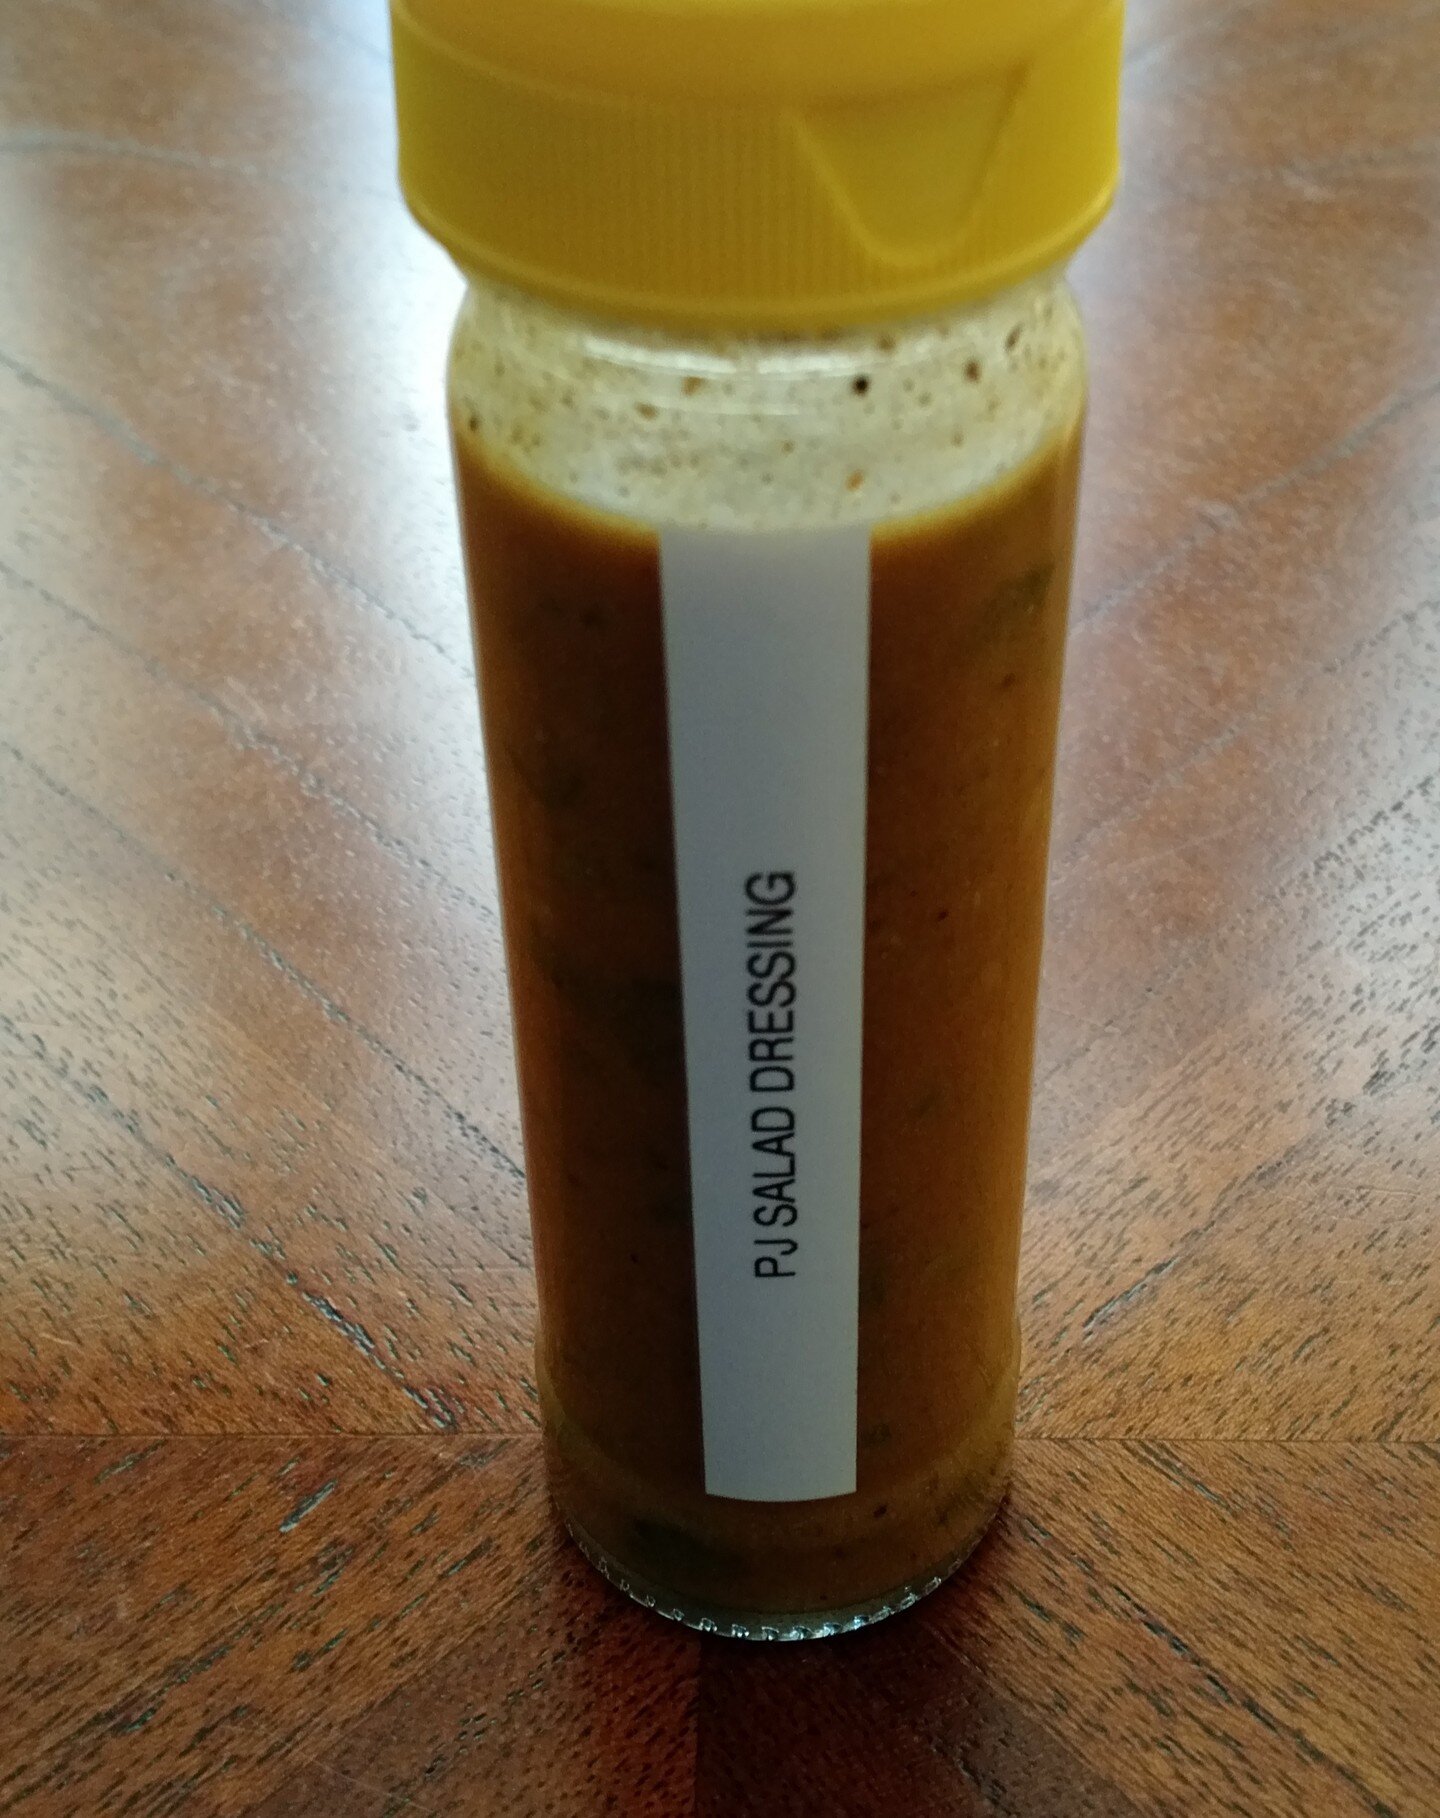 Making your own homemade dressing is a great way to keep salads healthy to reach your fitness goals.

#lifestyle #homemade #healthyfood #saladdressing